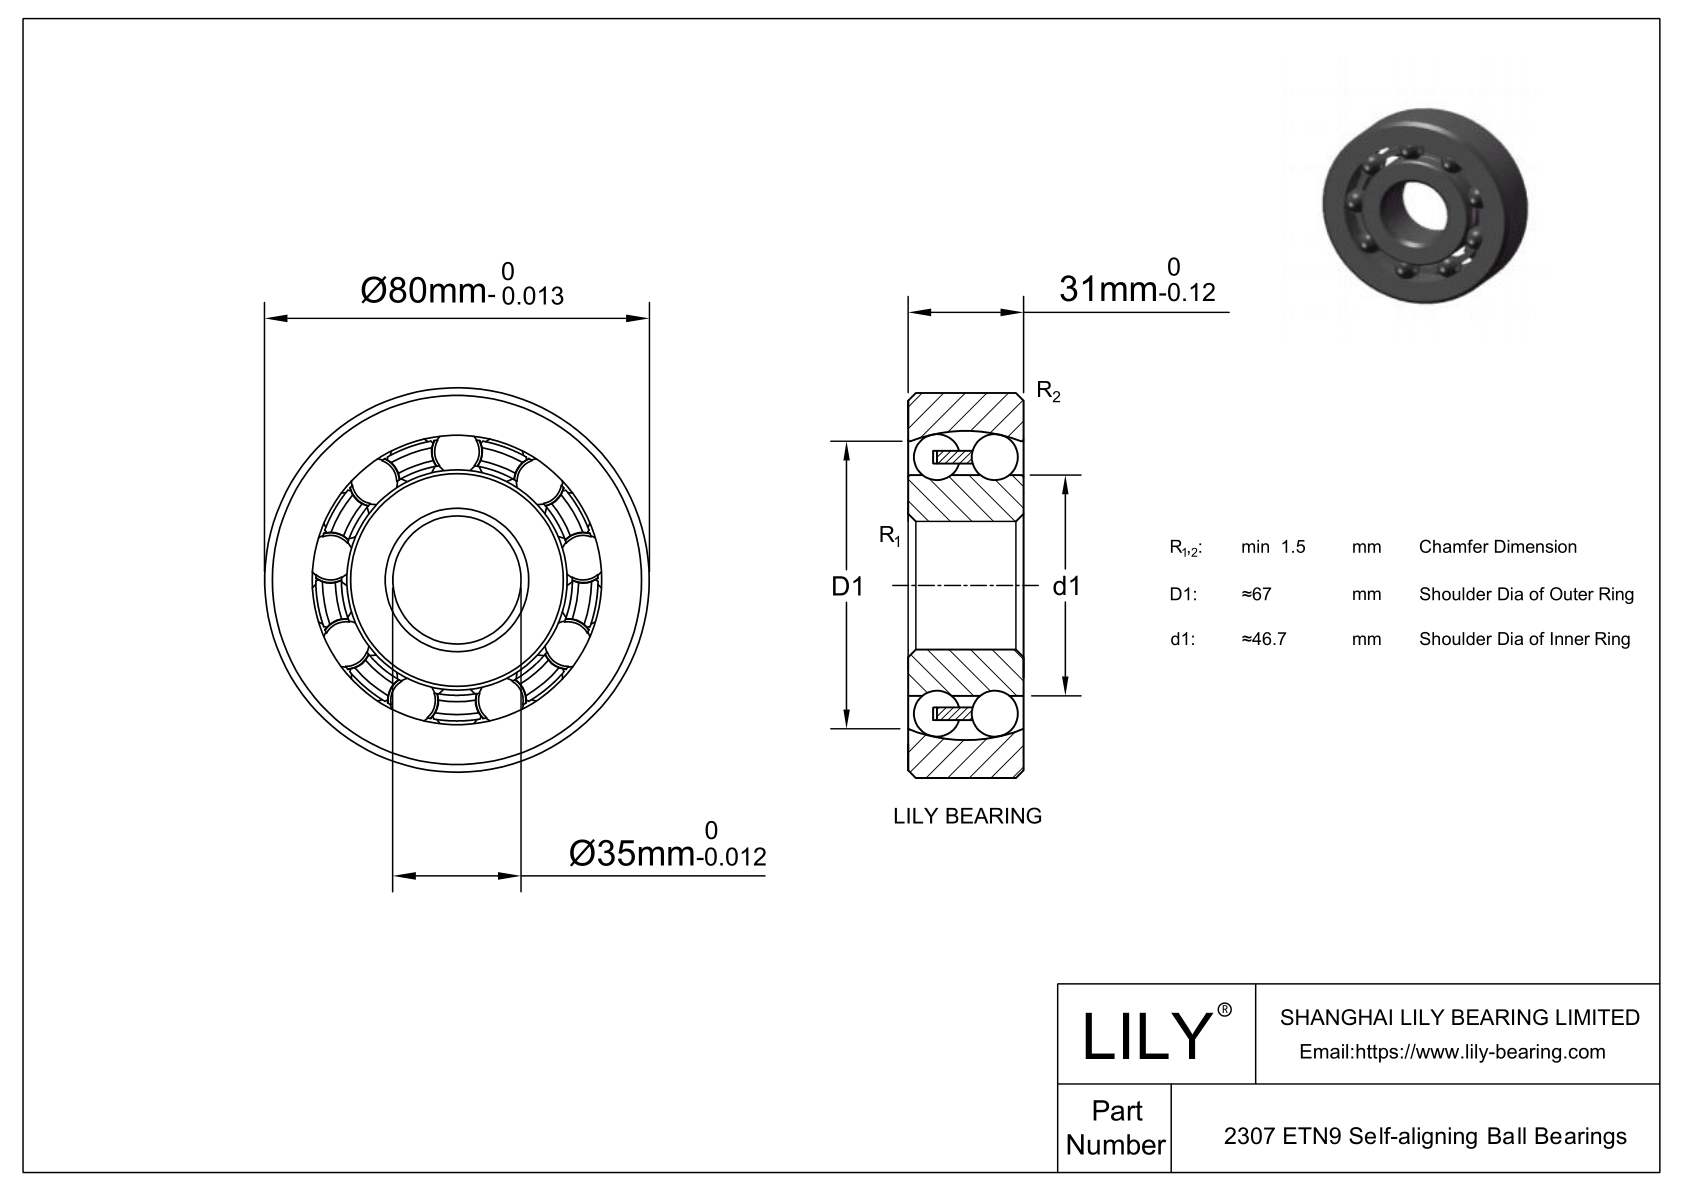 S2307 ETN9 Stainless Steel Self Aligning Ball Bearings cad drawing